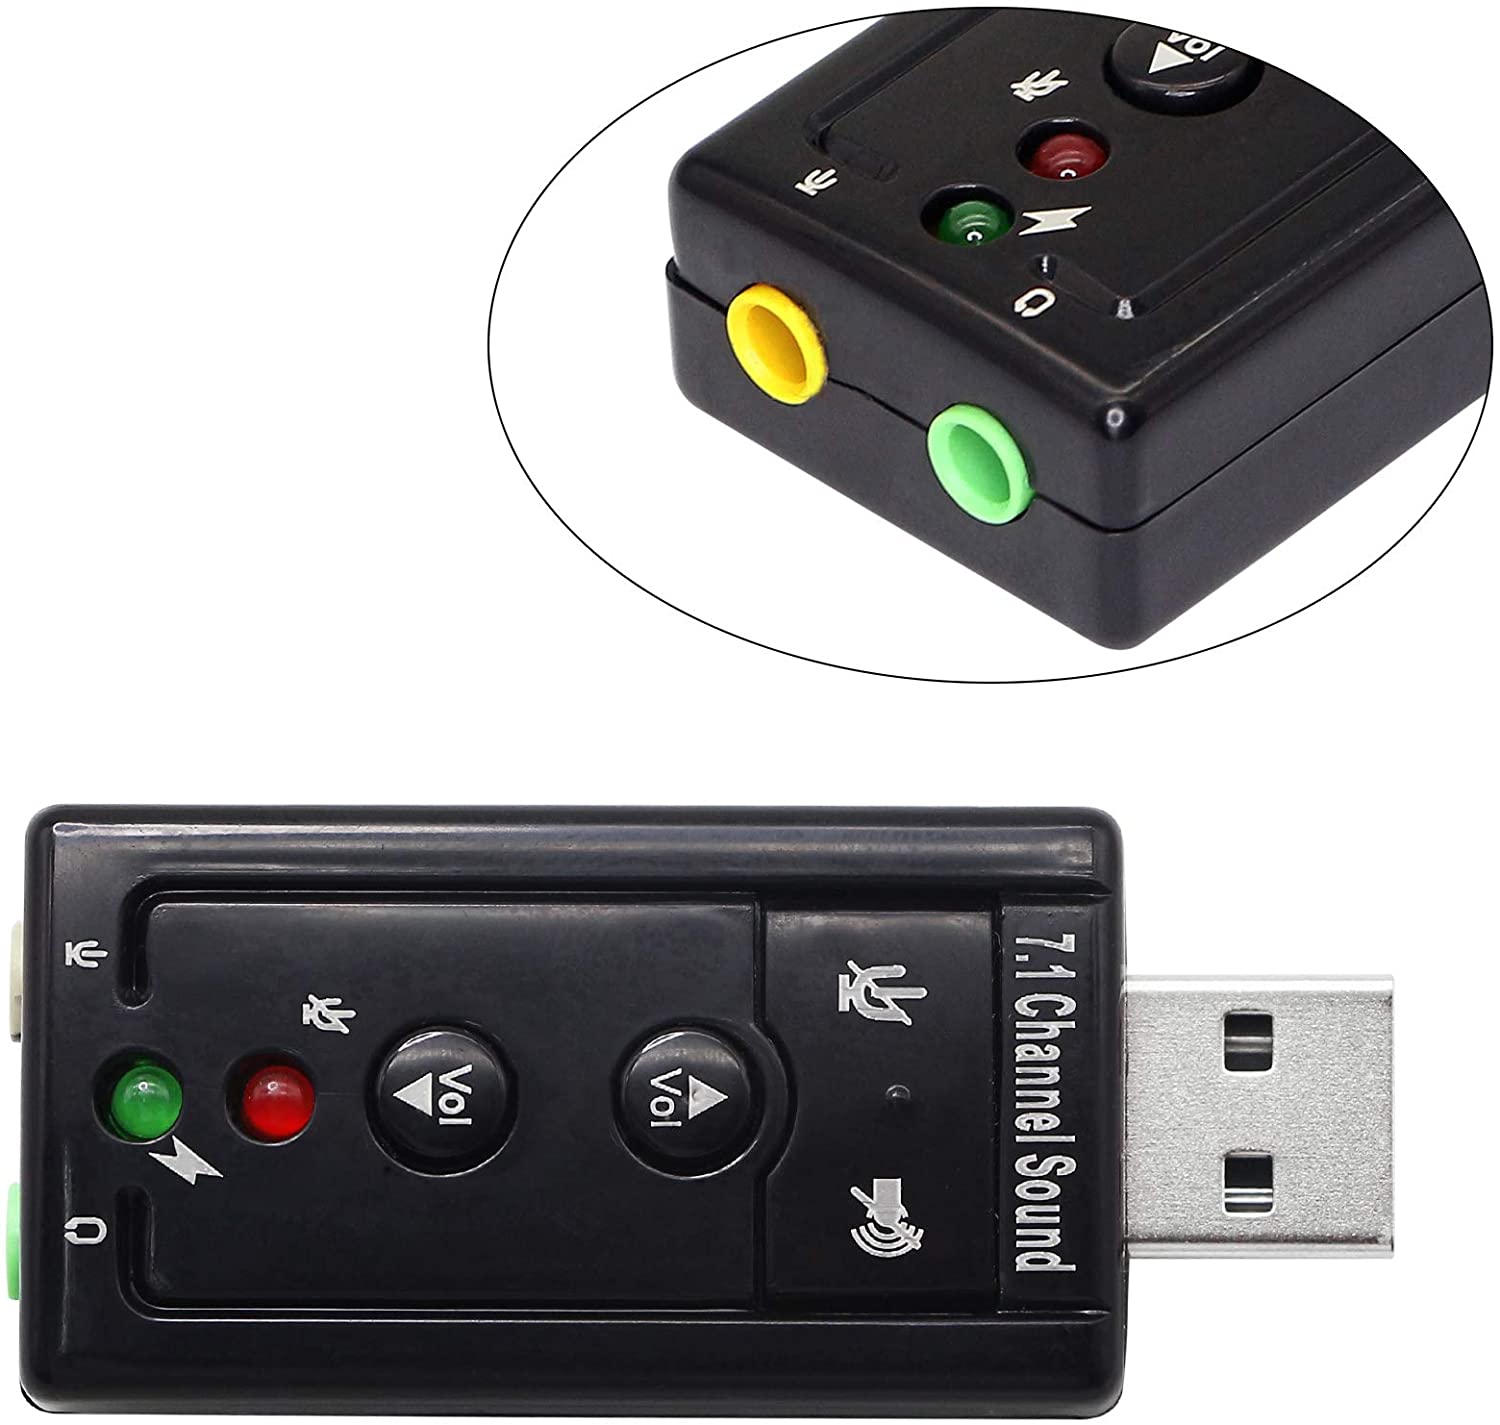 7.1 USB Stereo Audio Adapter External Sound Card - Sound card - stereo - USB 2.0 - ICUSBAUDIO7,Black - image 3 of 6